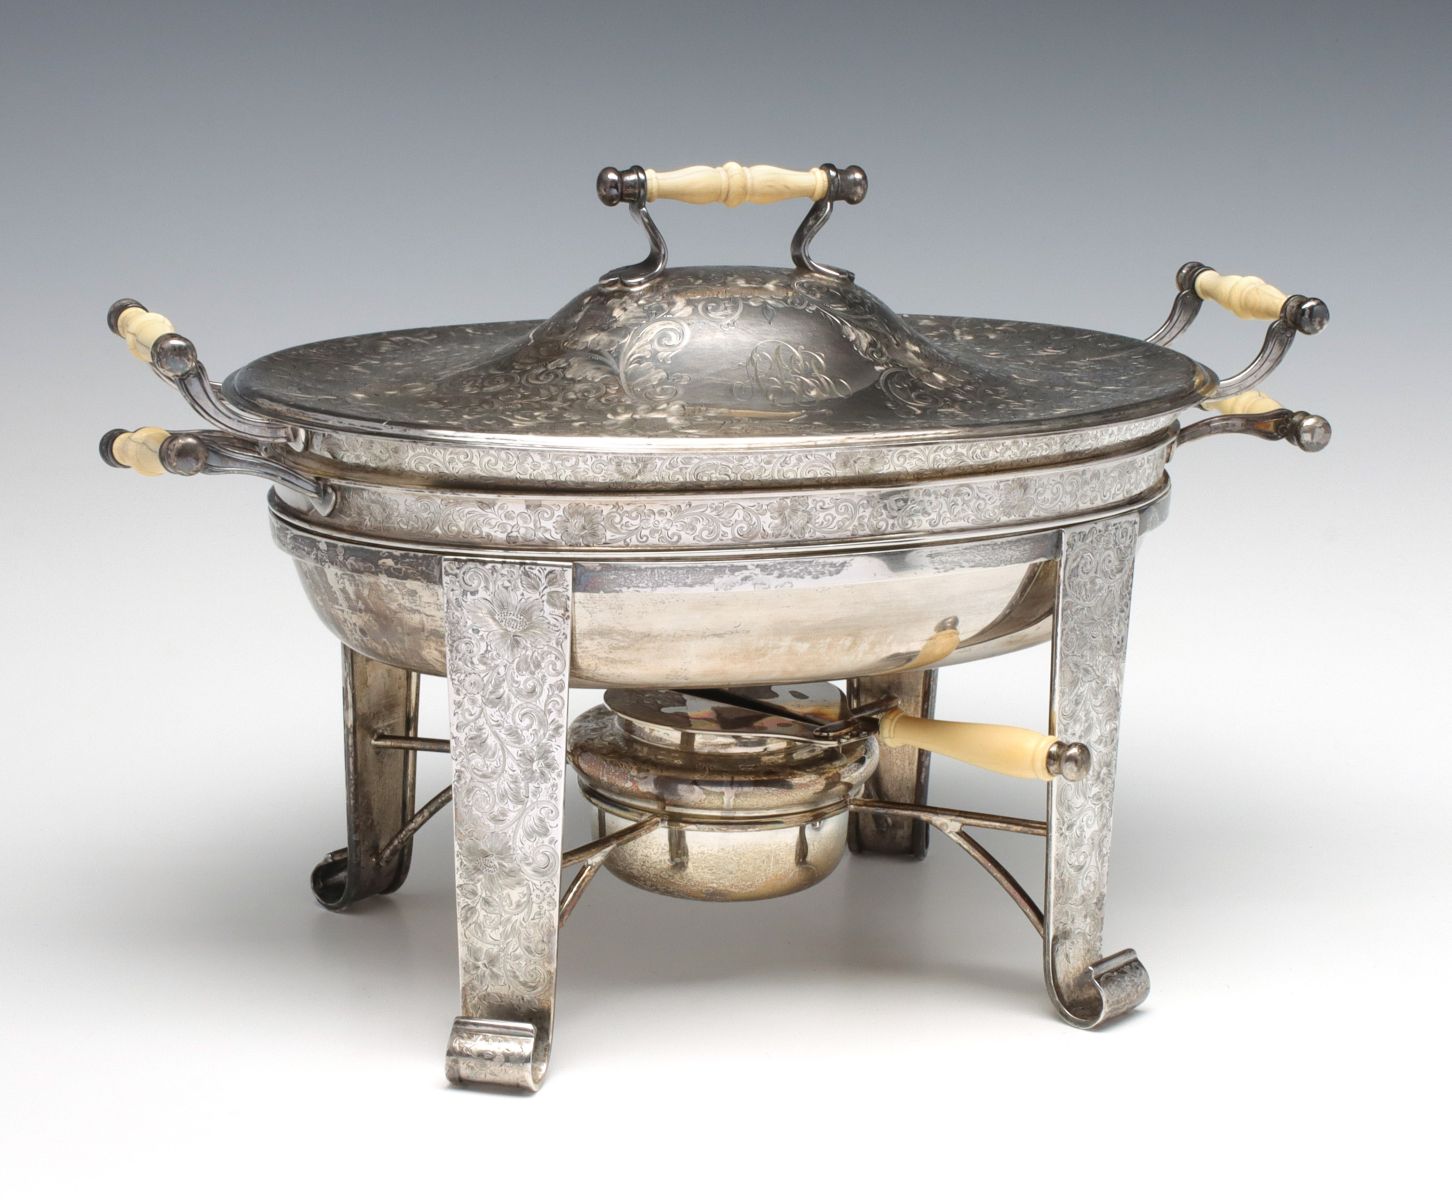 A STERLING CHAFING DISH FOR SHREVE, CRUMP & LOW CO